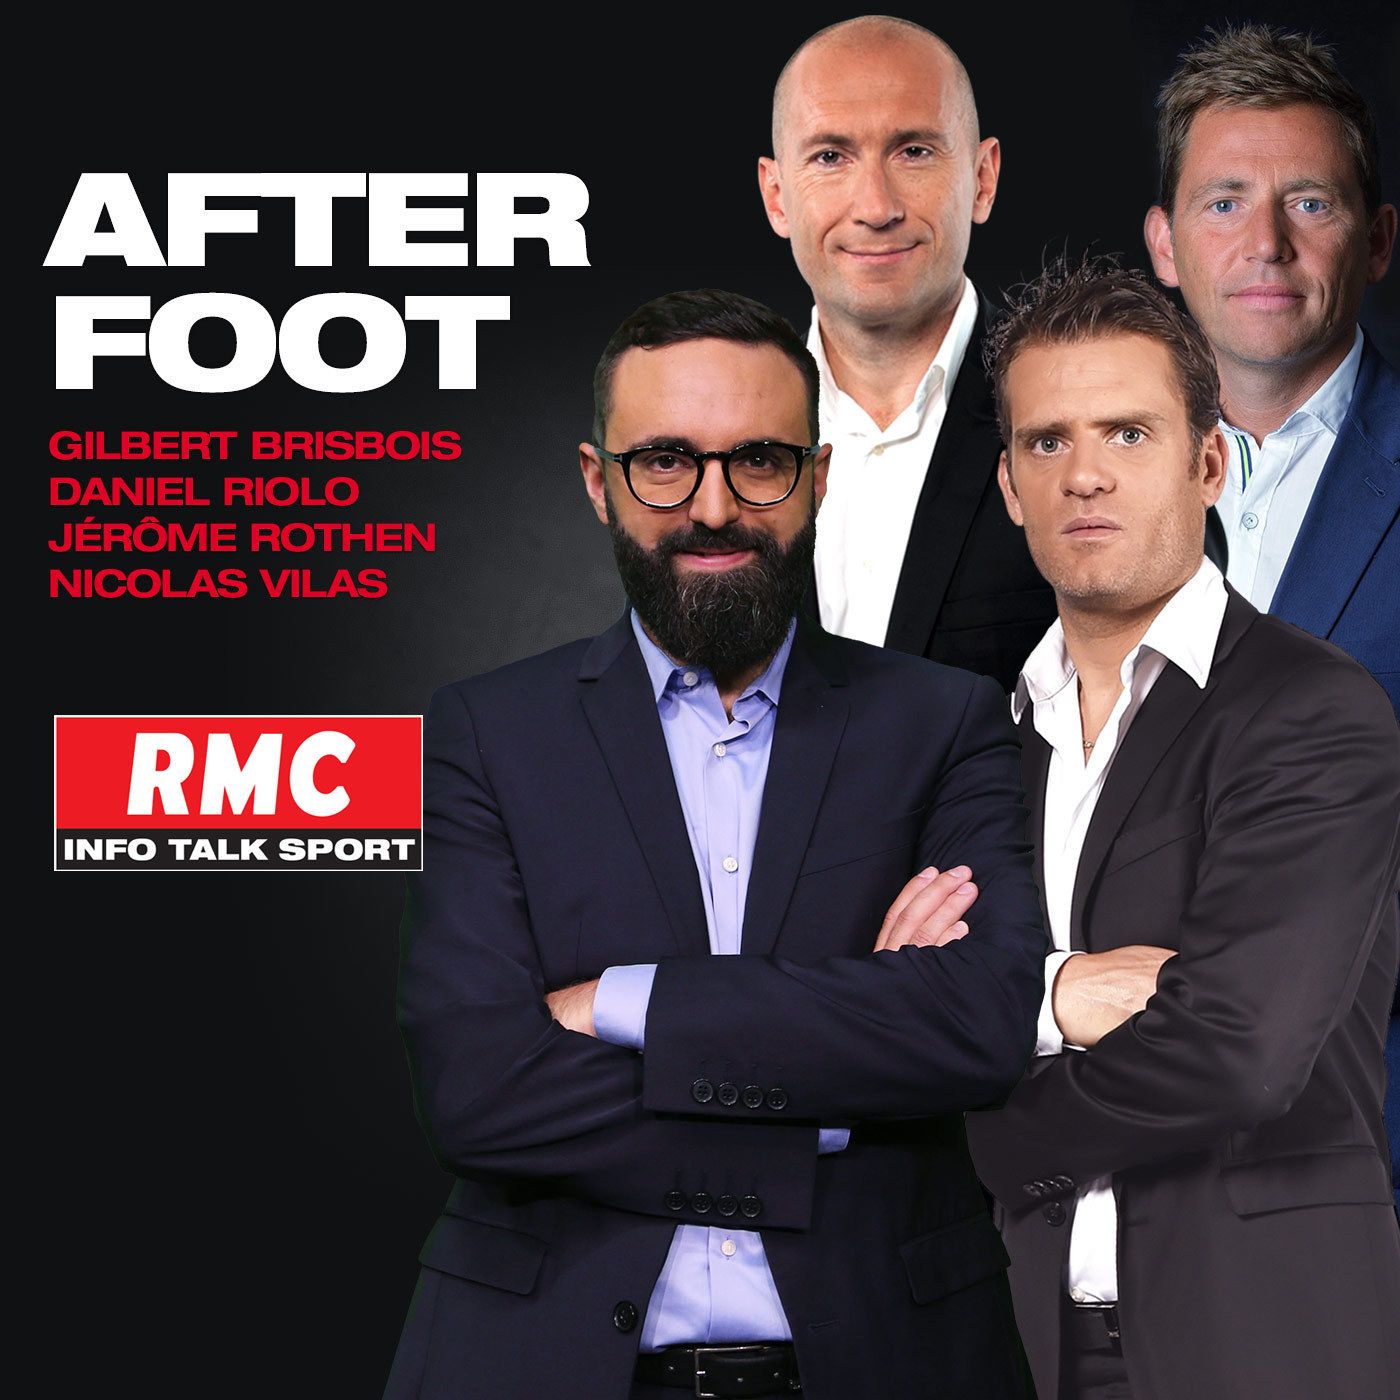 L'After Foot / RMC : 08/05 - L'Afterfoot